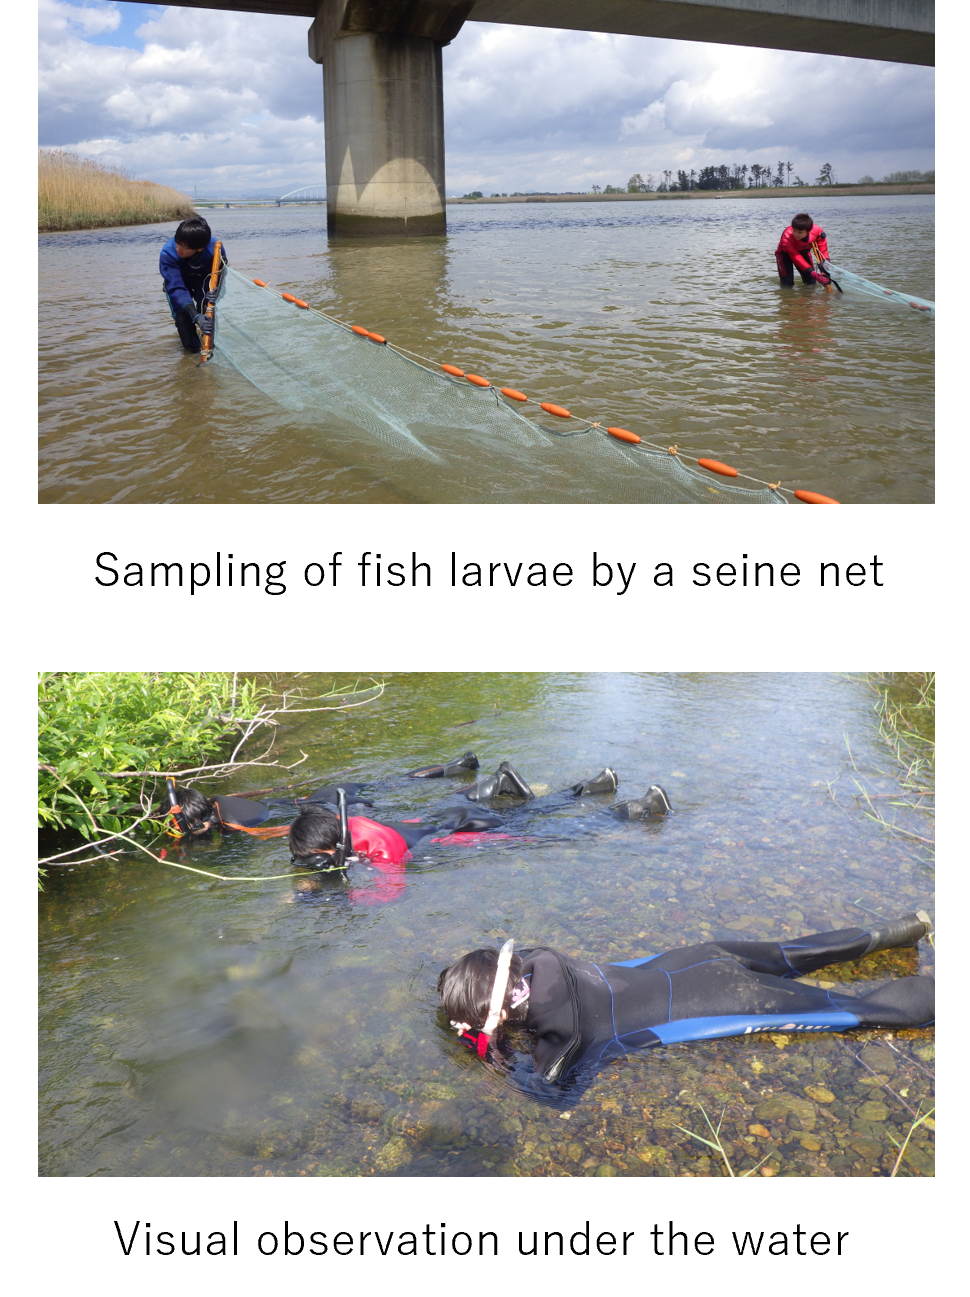 Sampling of fish larvae by a seine net and visual observation under the water
